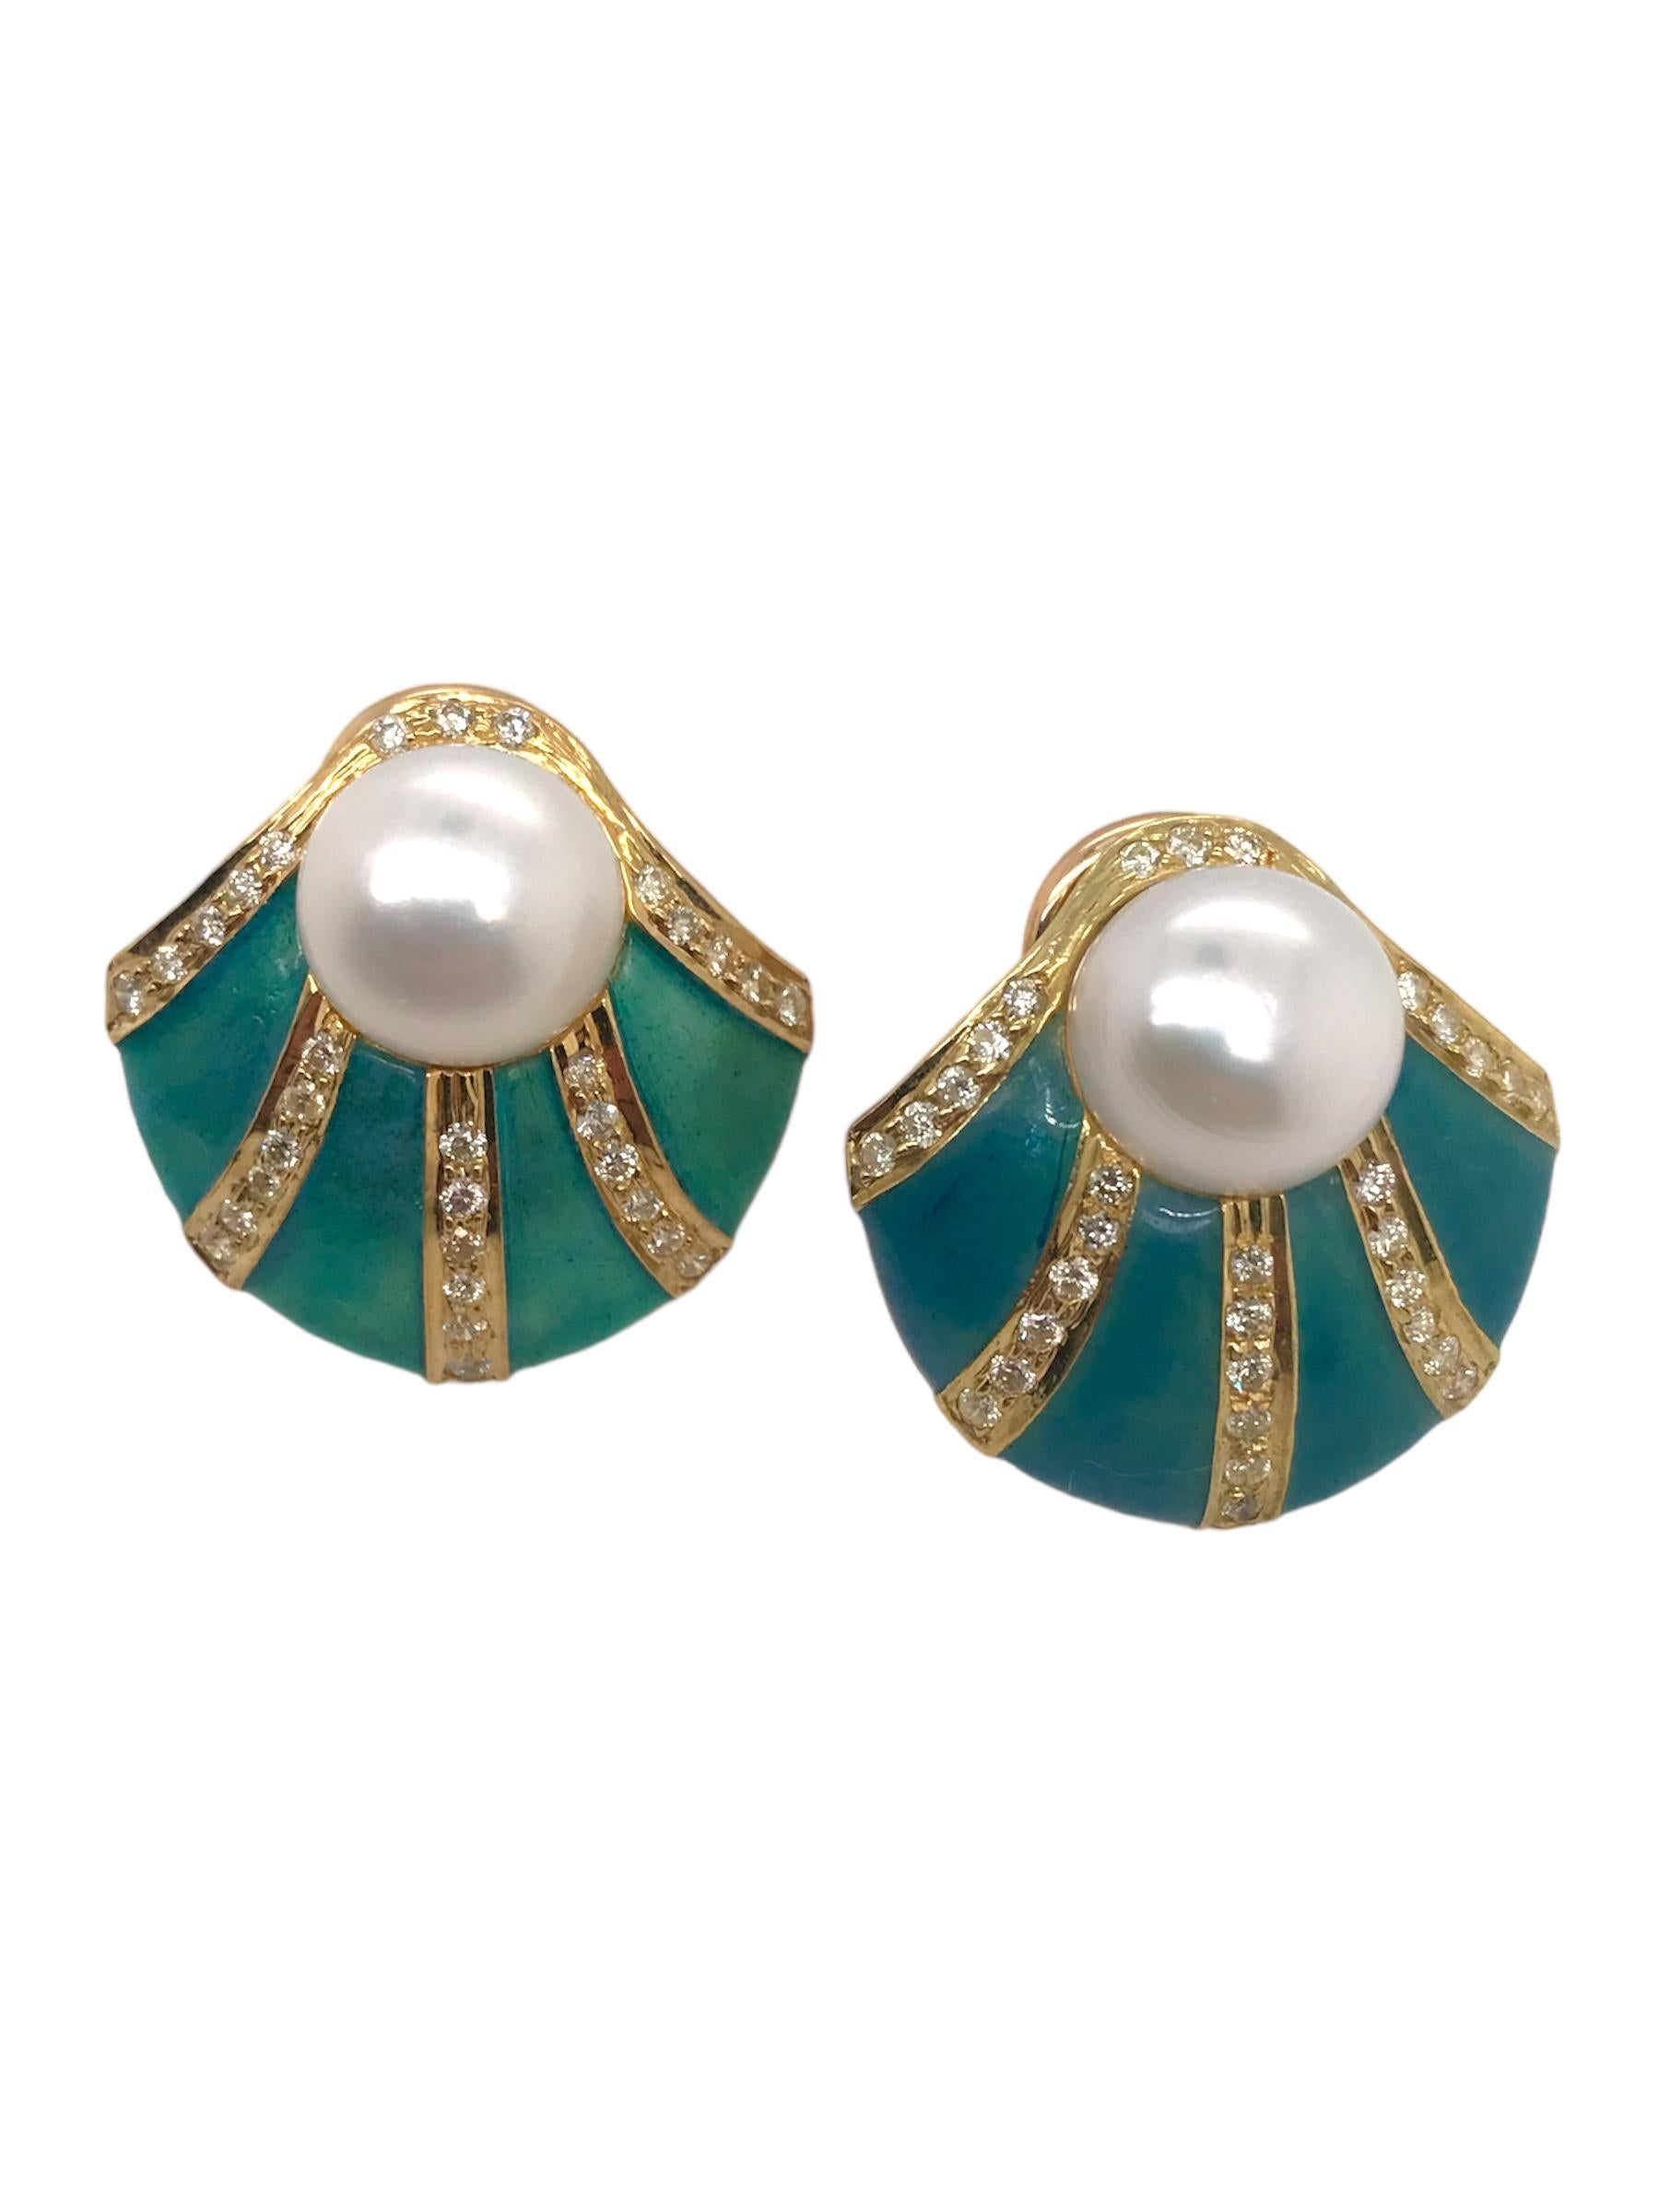 Contemporary Turquoise Colored Enamel Shell Shaped Pearl & Diamond Earrings 18K Yellow Gold